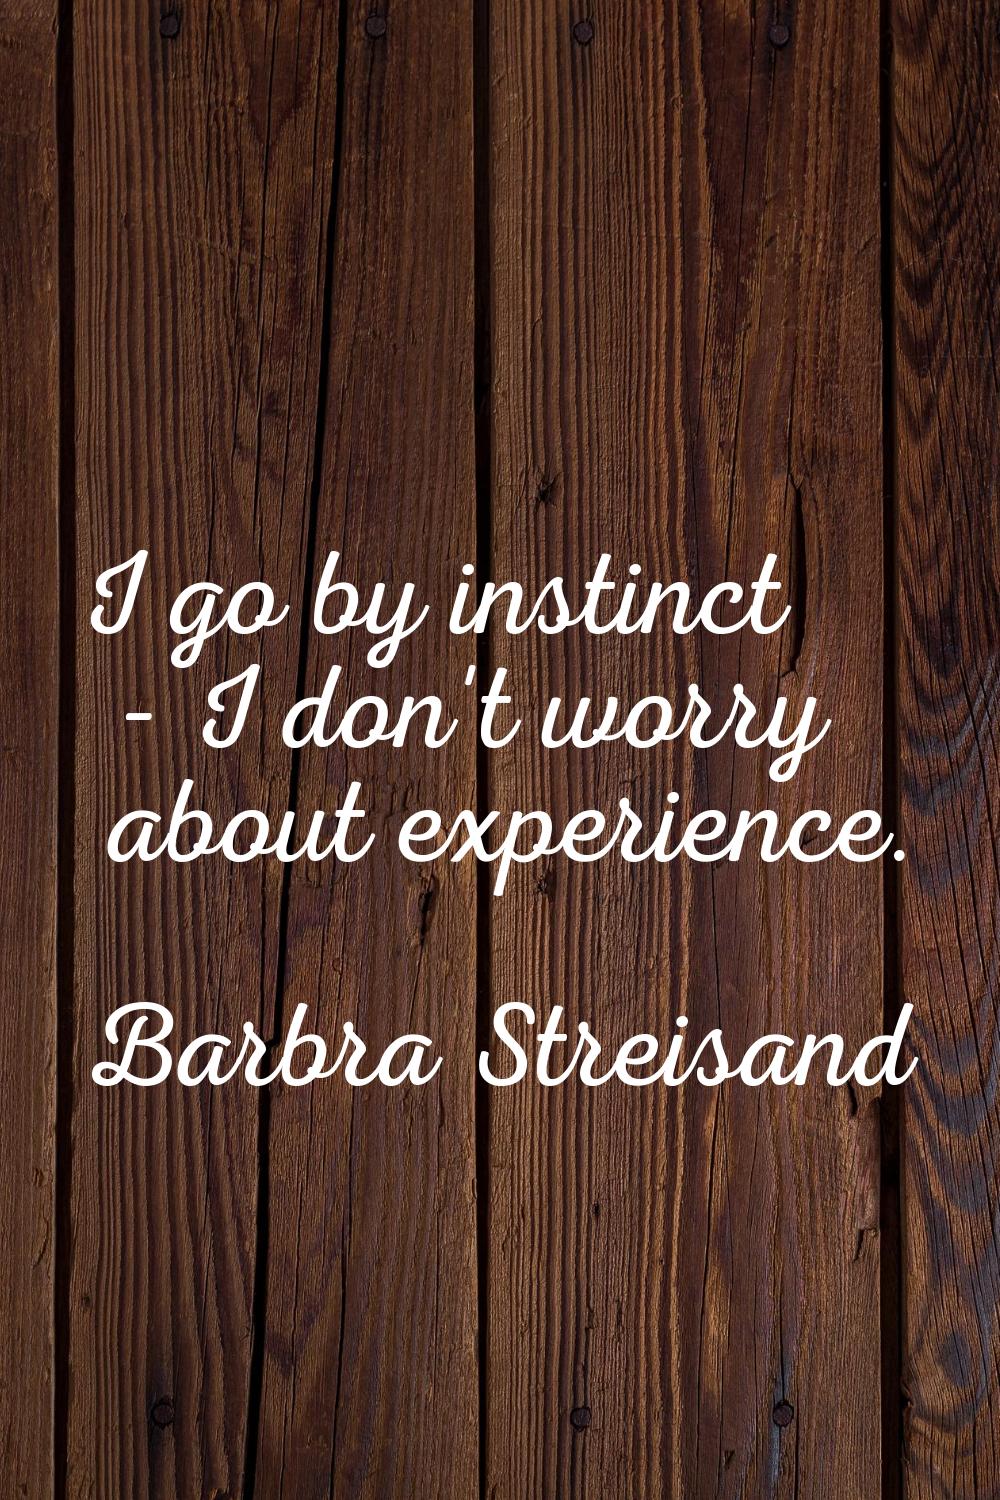 I go by instinct - I don't worry about experience.